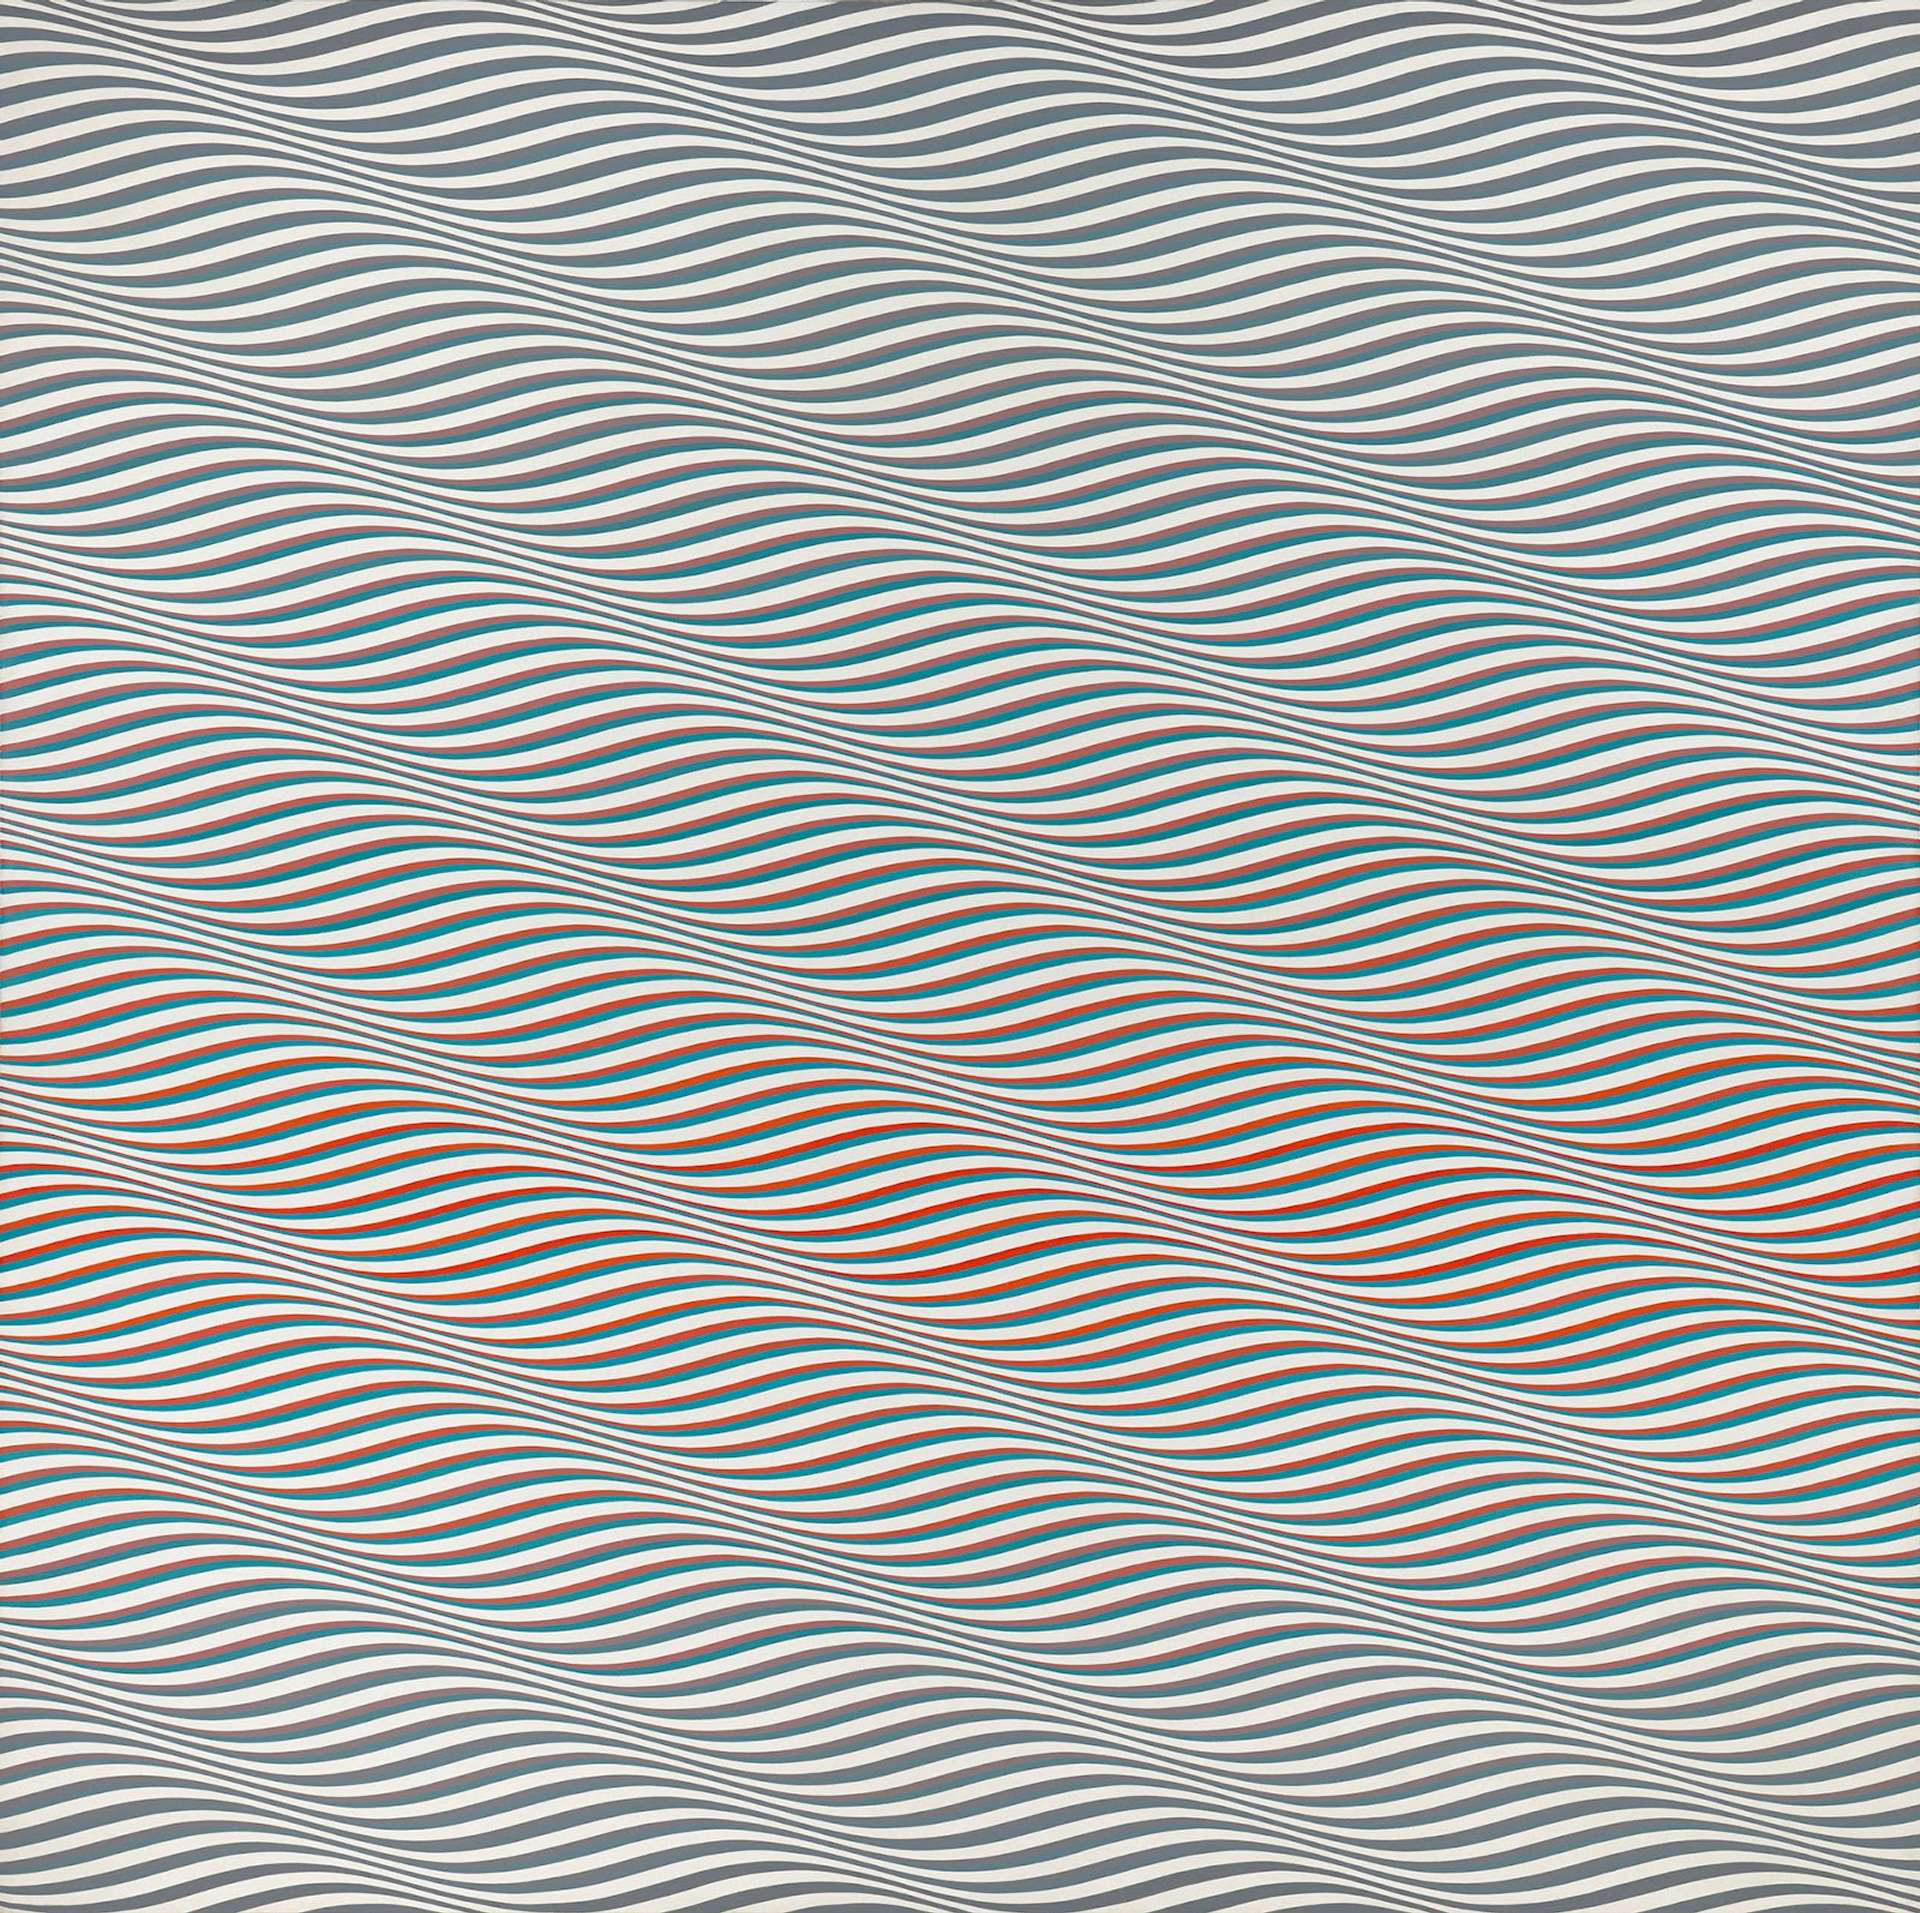 An optical abstract painting titled "Cataract 3" featuring vertical black and white stripes of varying widths arranged in a rhythmic pattern, creating an illusion of movement and depth.